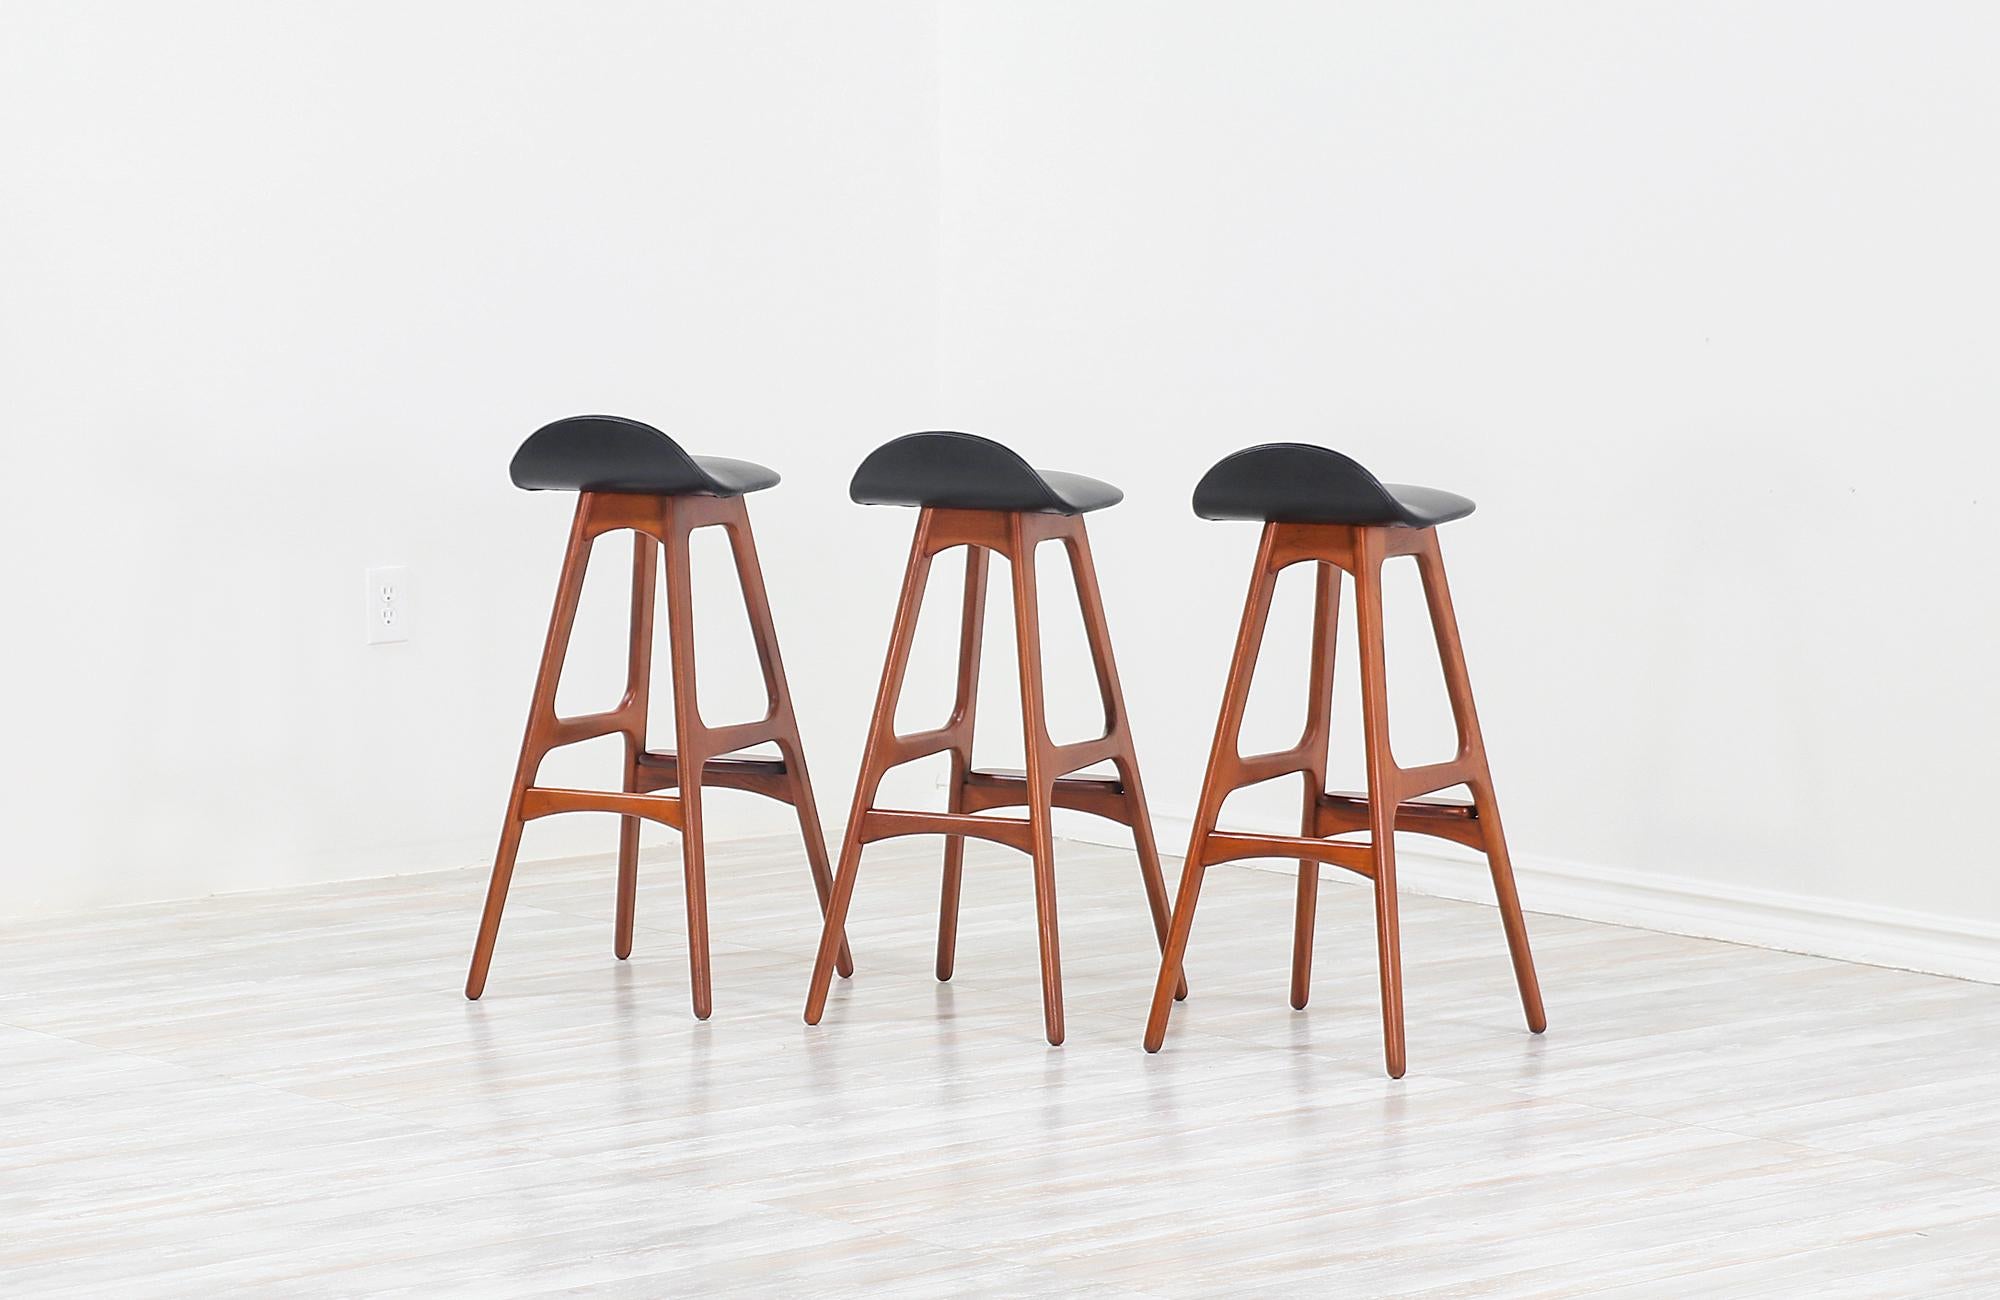 Set of three modern bar stools model 61 designed by Erik Buch for Oddense Maskinsnedkeri and manufactured in Denmark, circa 1950s. These exceptionally crafted stools feature a minimalist streamline with a solid teak wood frame and a gorgeously